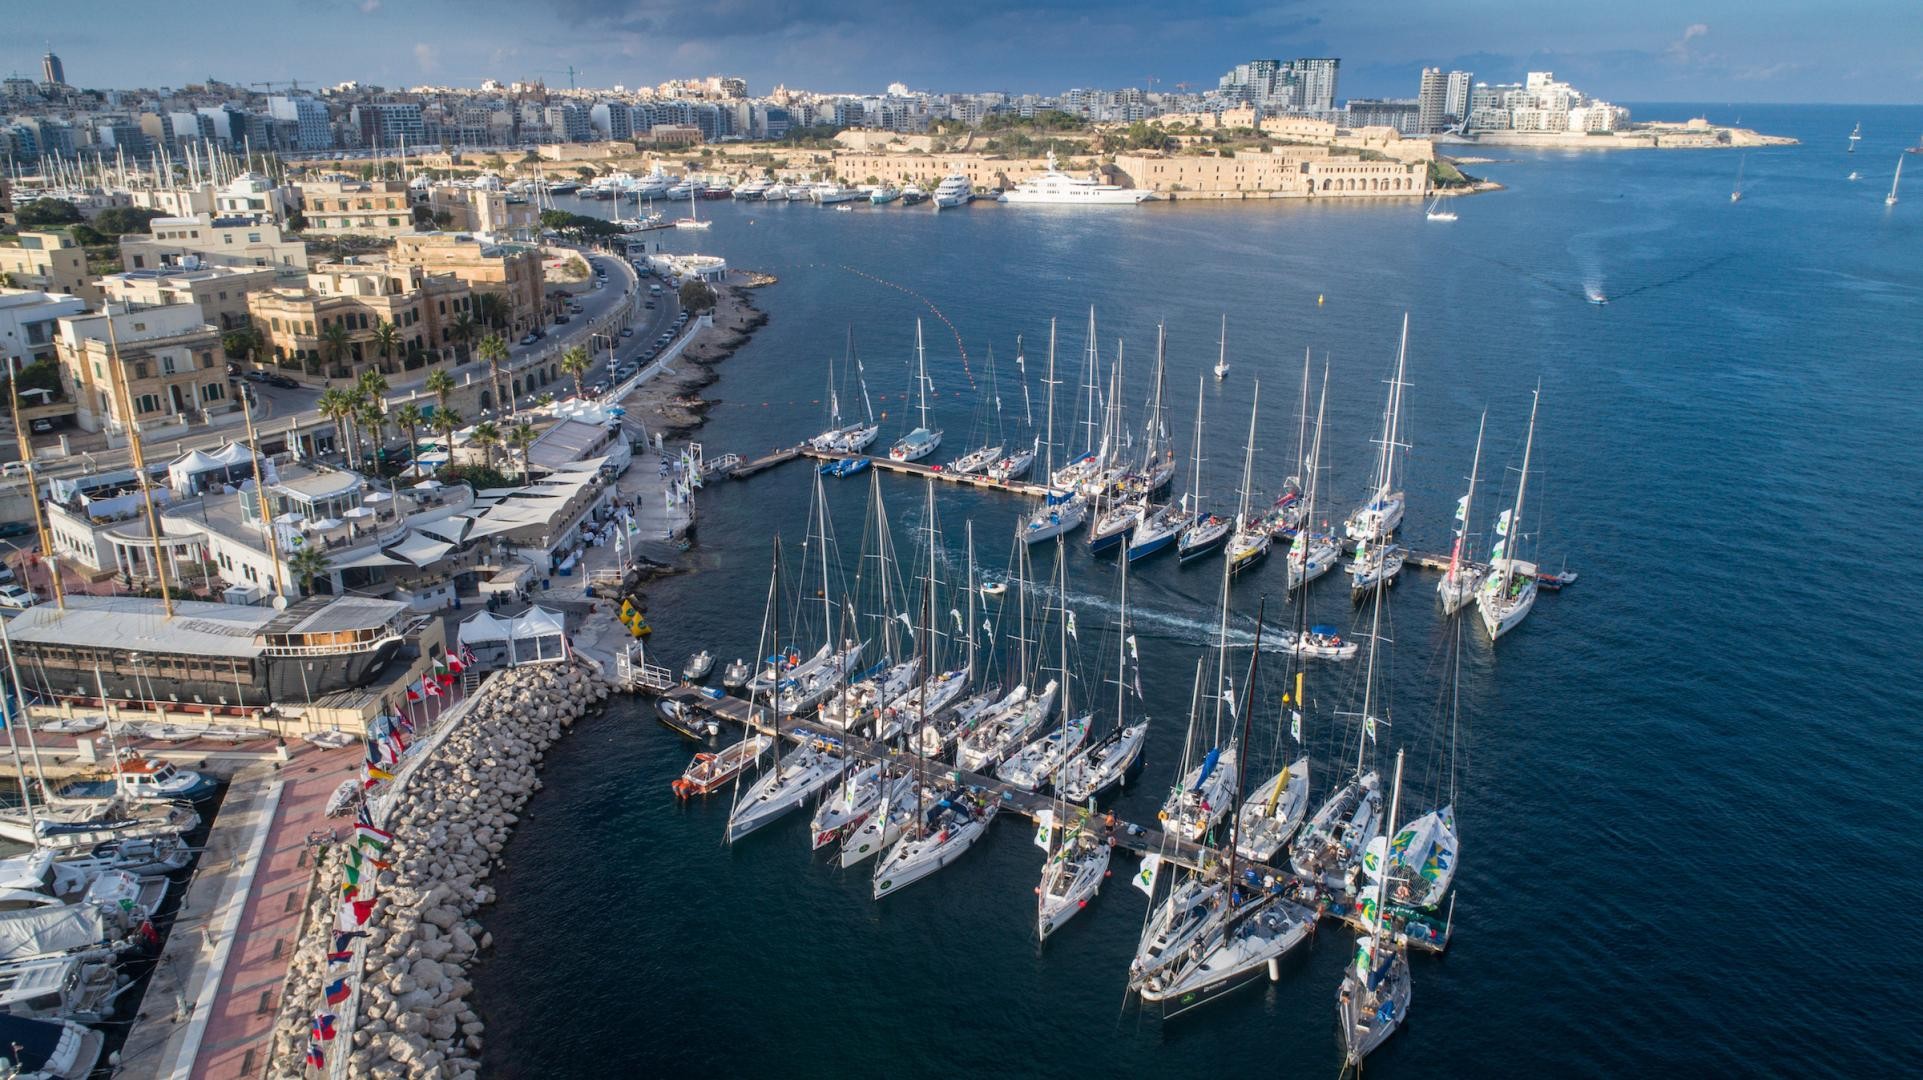 Malta Altus Challenge is the new entry of the 36th America’s Cup